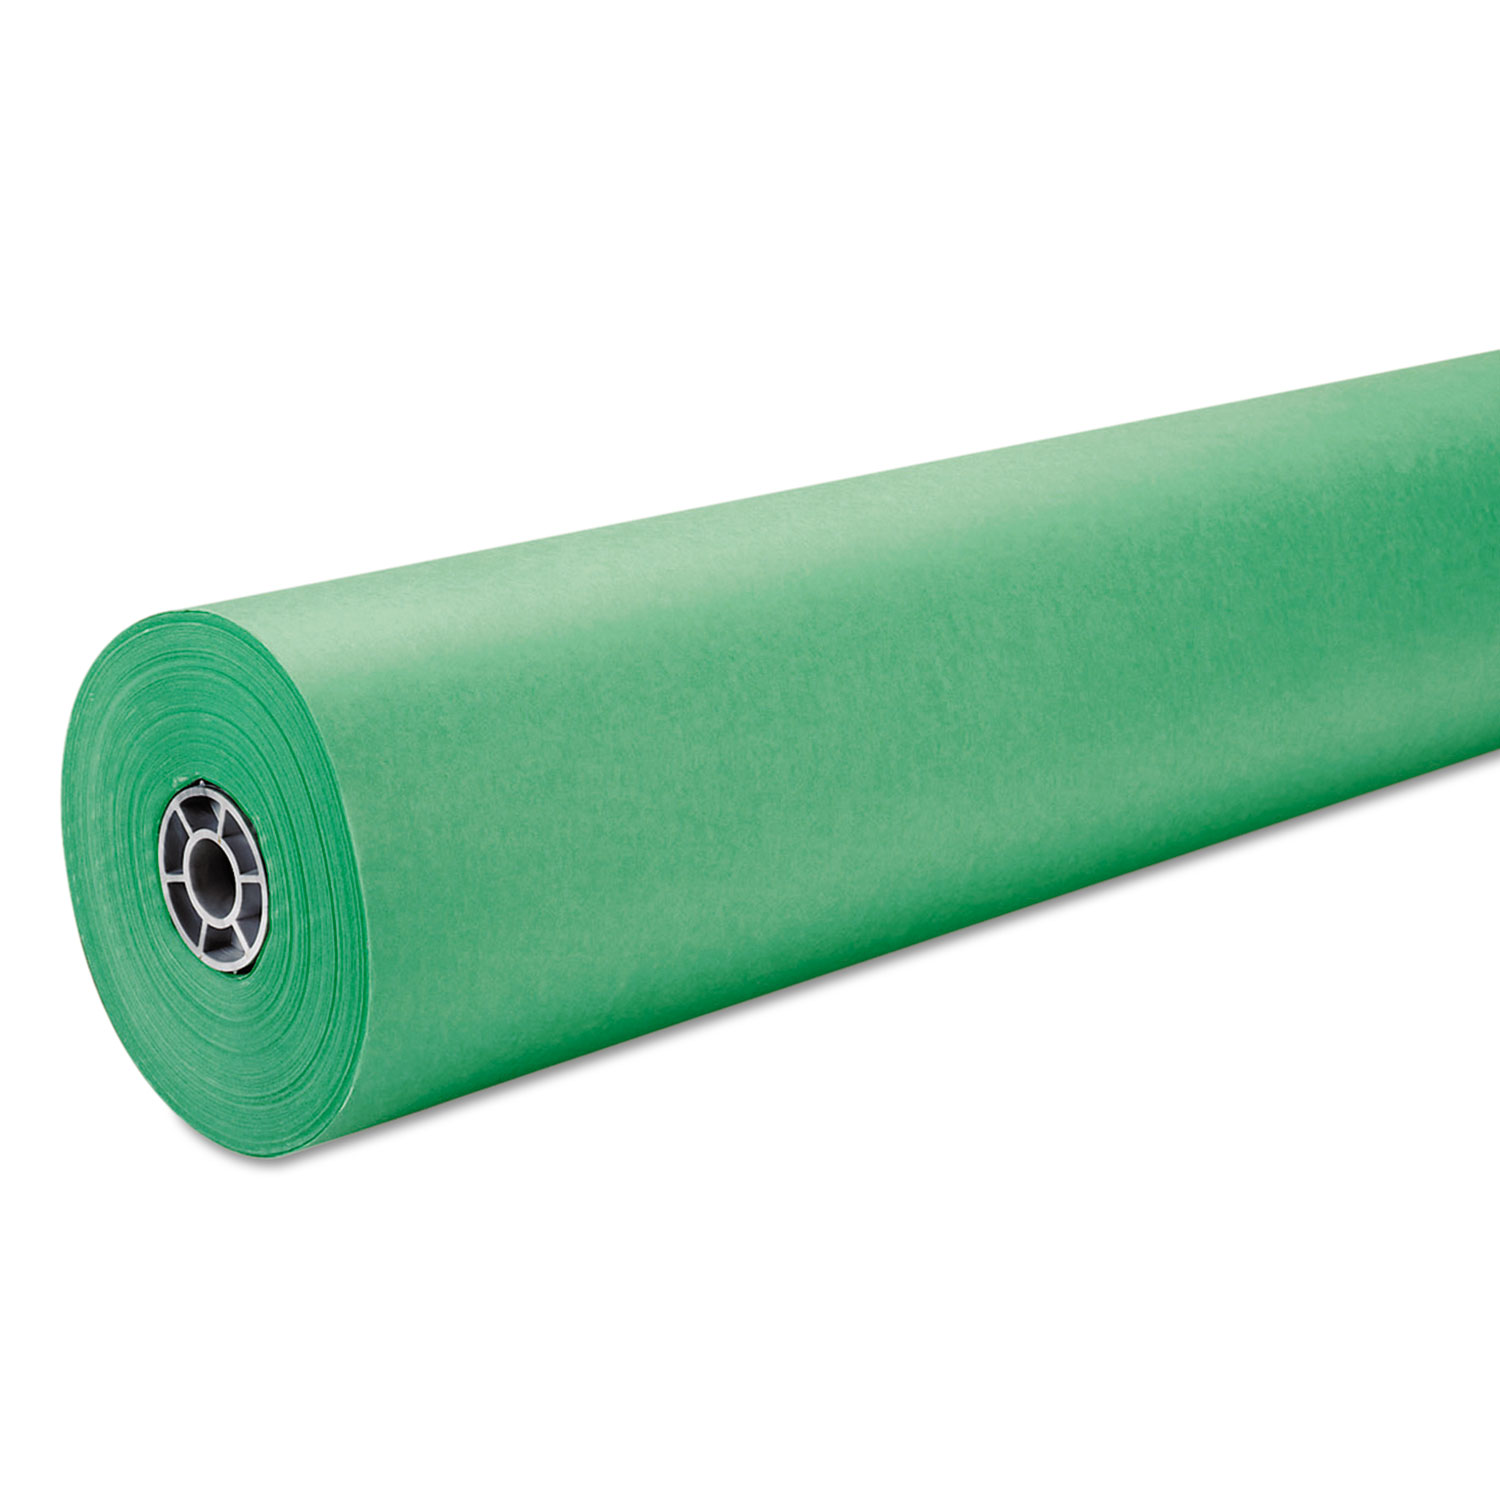 Pacon PAC63130 Rainbow Duo-Finish Colored Kraft Paper, 35 lbs., 36" x 1000 ft, Brite Green